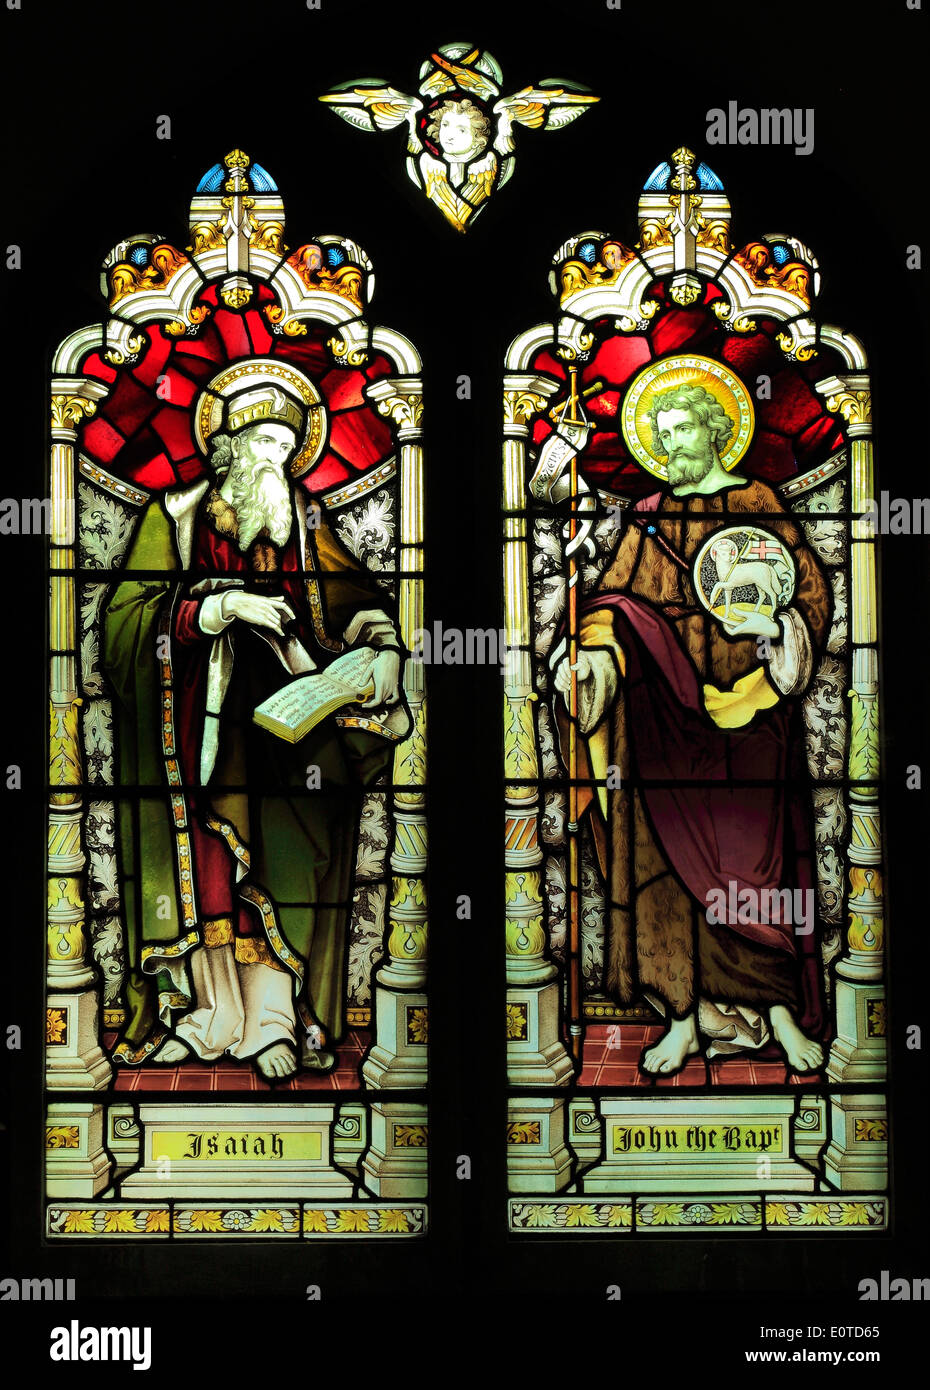 Prophet Isaiah and St. John the Baptist, stained glass window by Heaton, Butler & Bayne, c. 1890, West Newton, Norfolk England Stock Photo